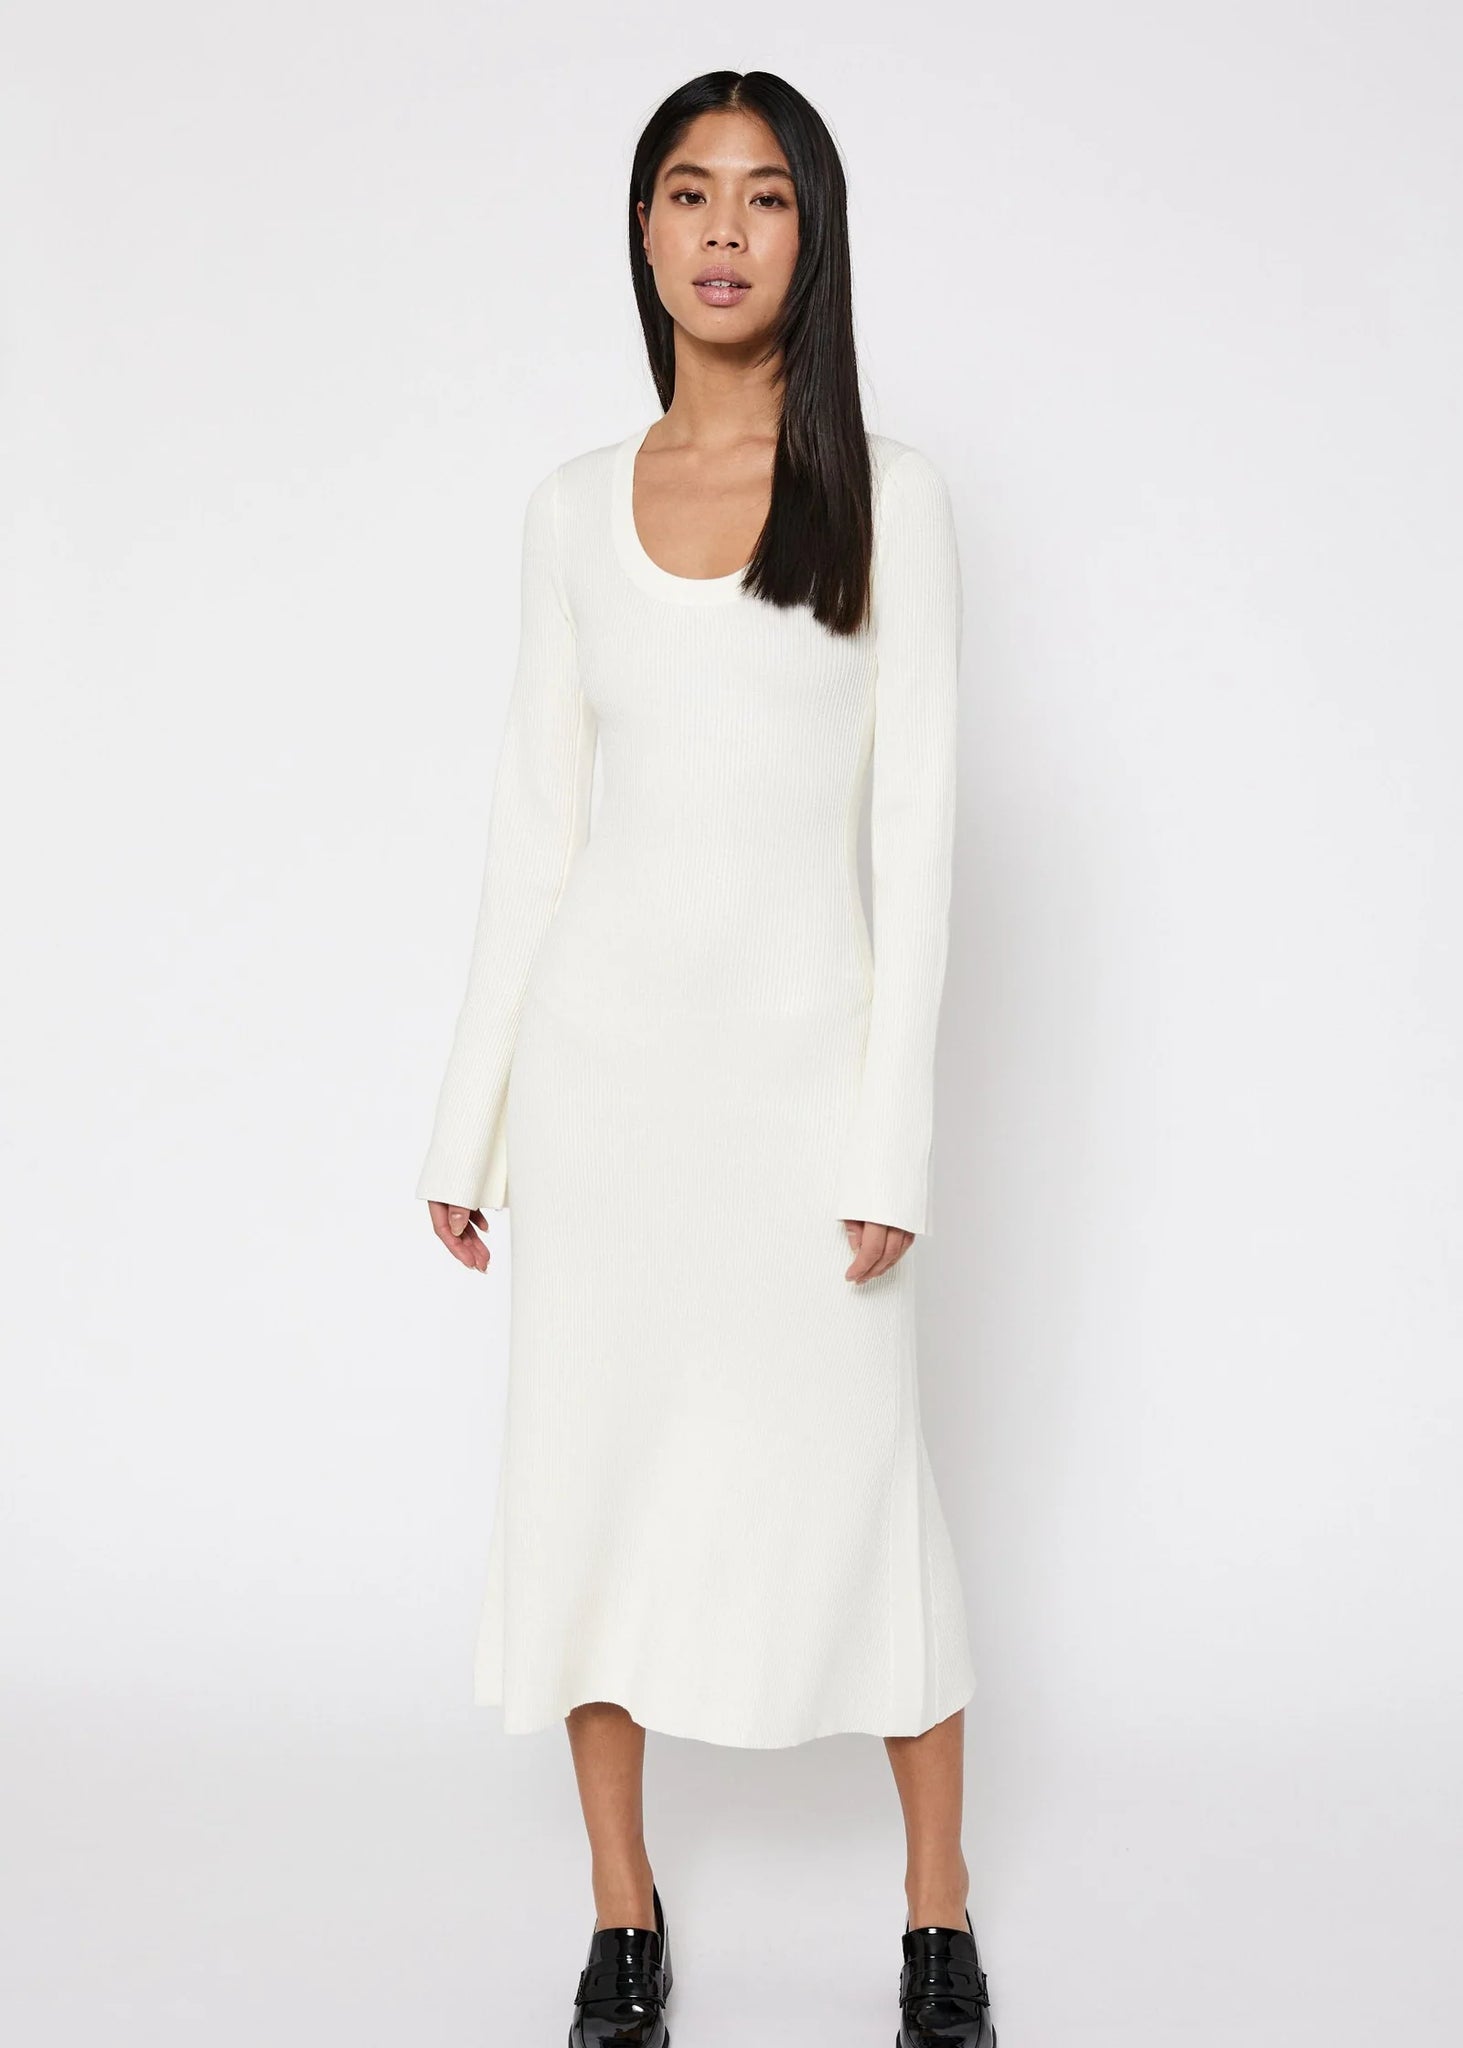 Sherry flared knit dress in off white